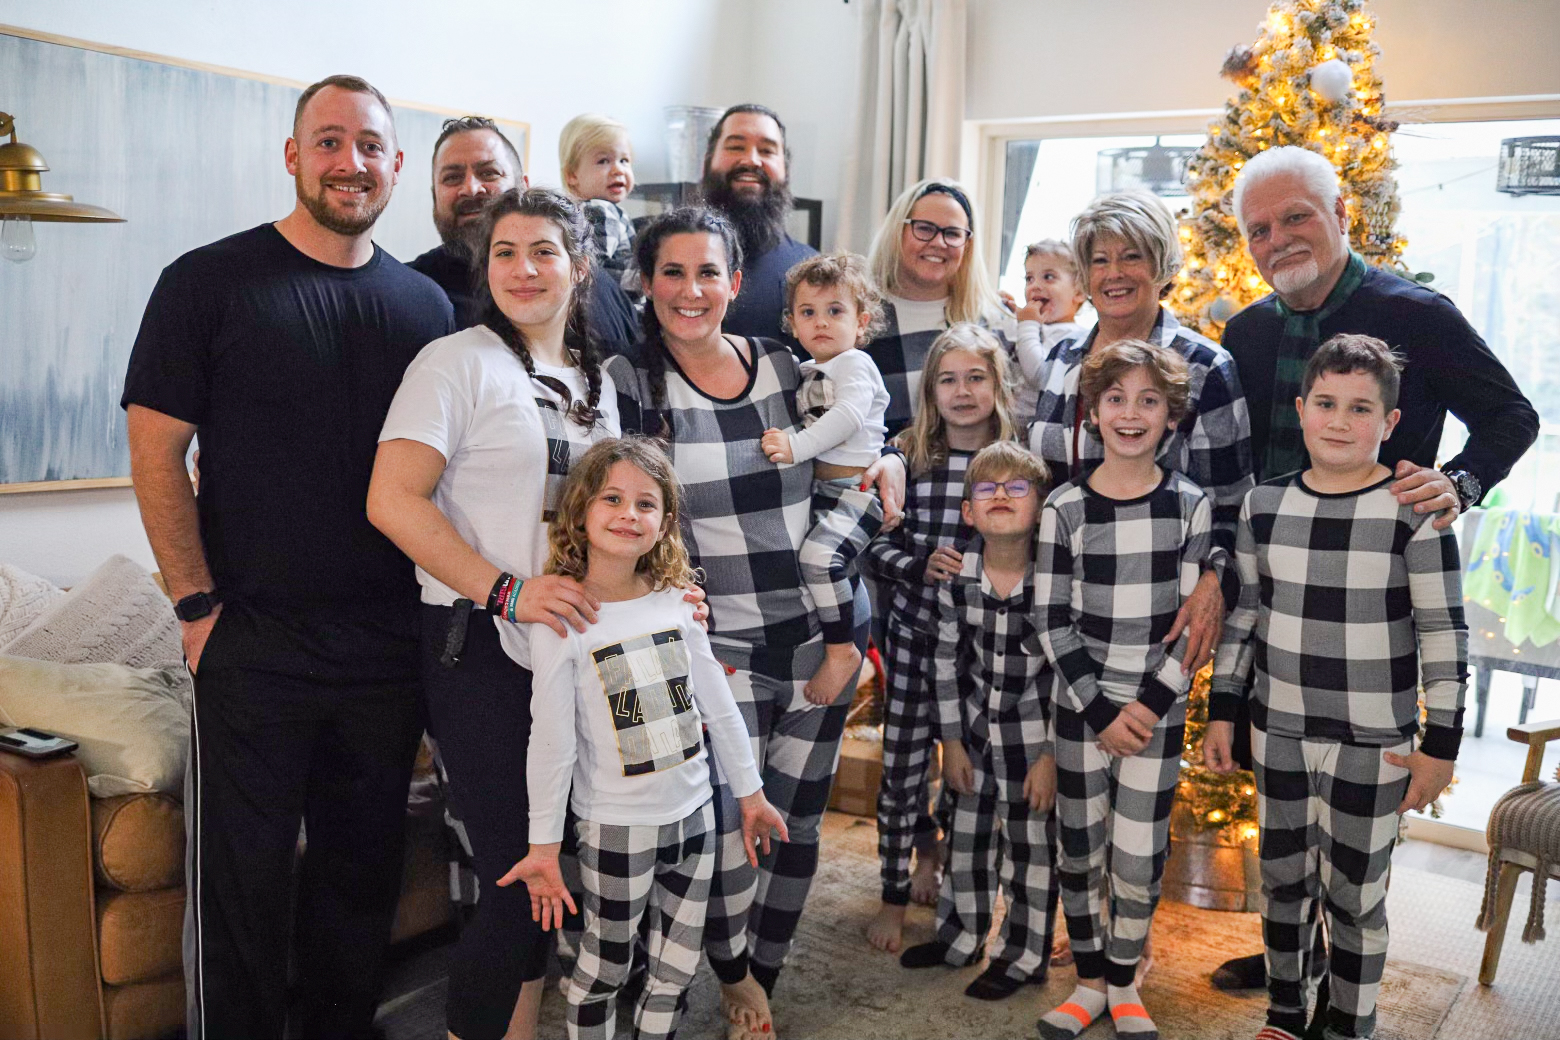 We love including the whole family and getting everyone matching pajamas